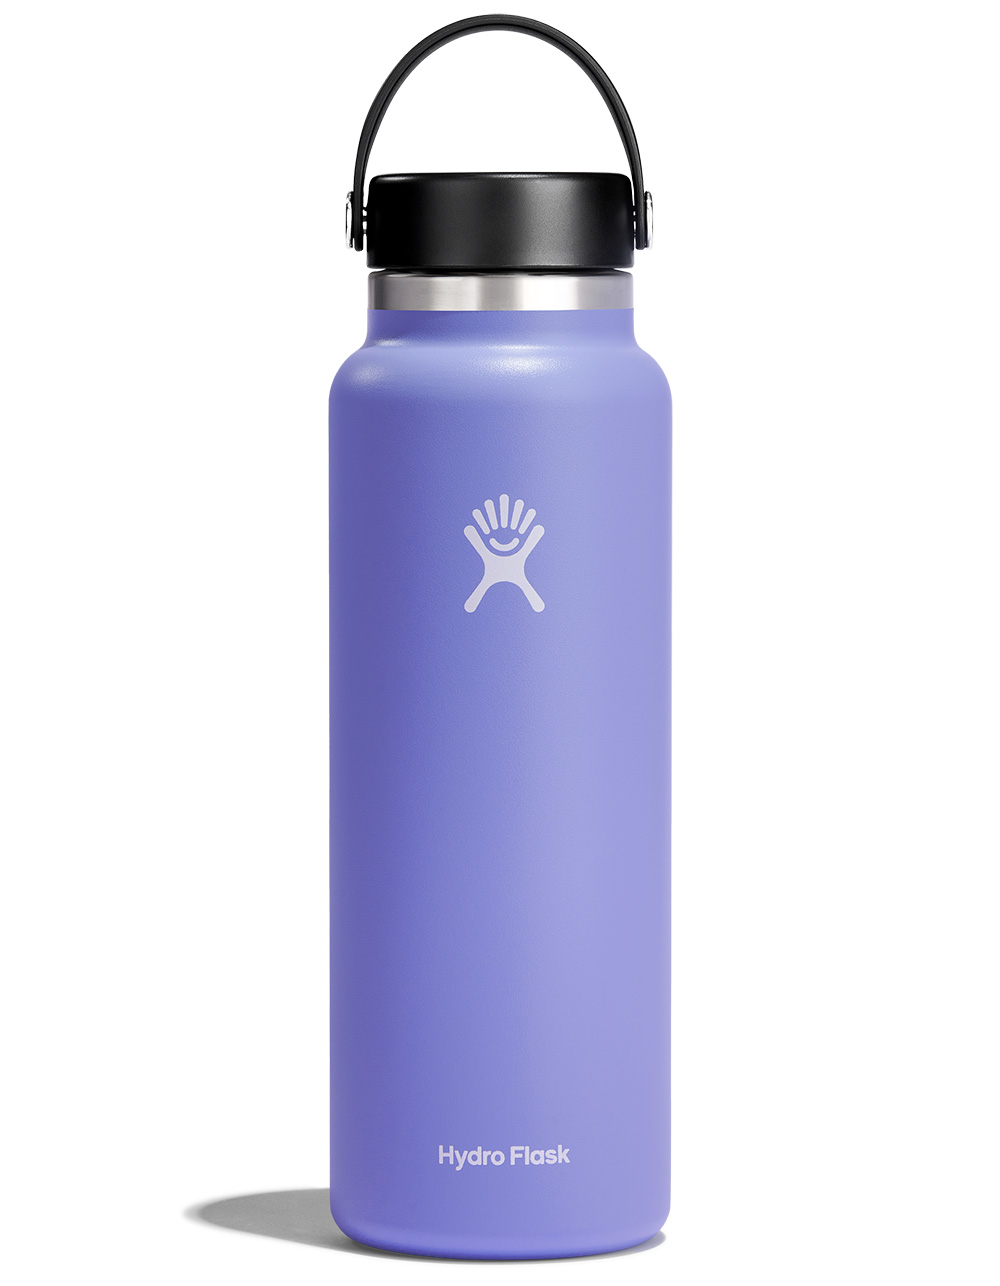 HYDRO FLASK 40 oz Wide Mouth Water Bottle - Special Edition - MOCHA, Tillys, Salesforce Commerce Cloud